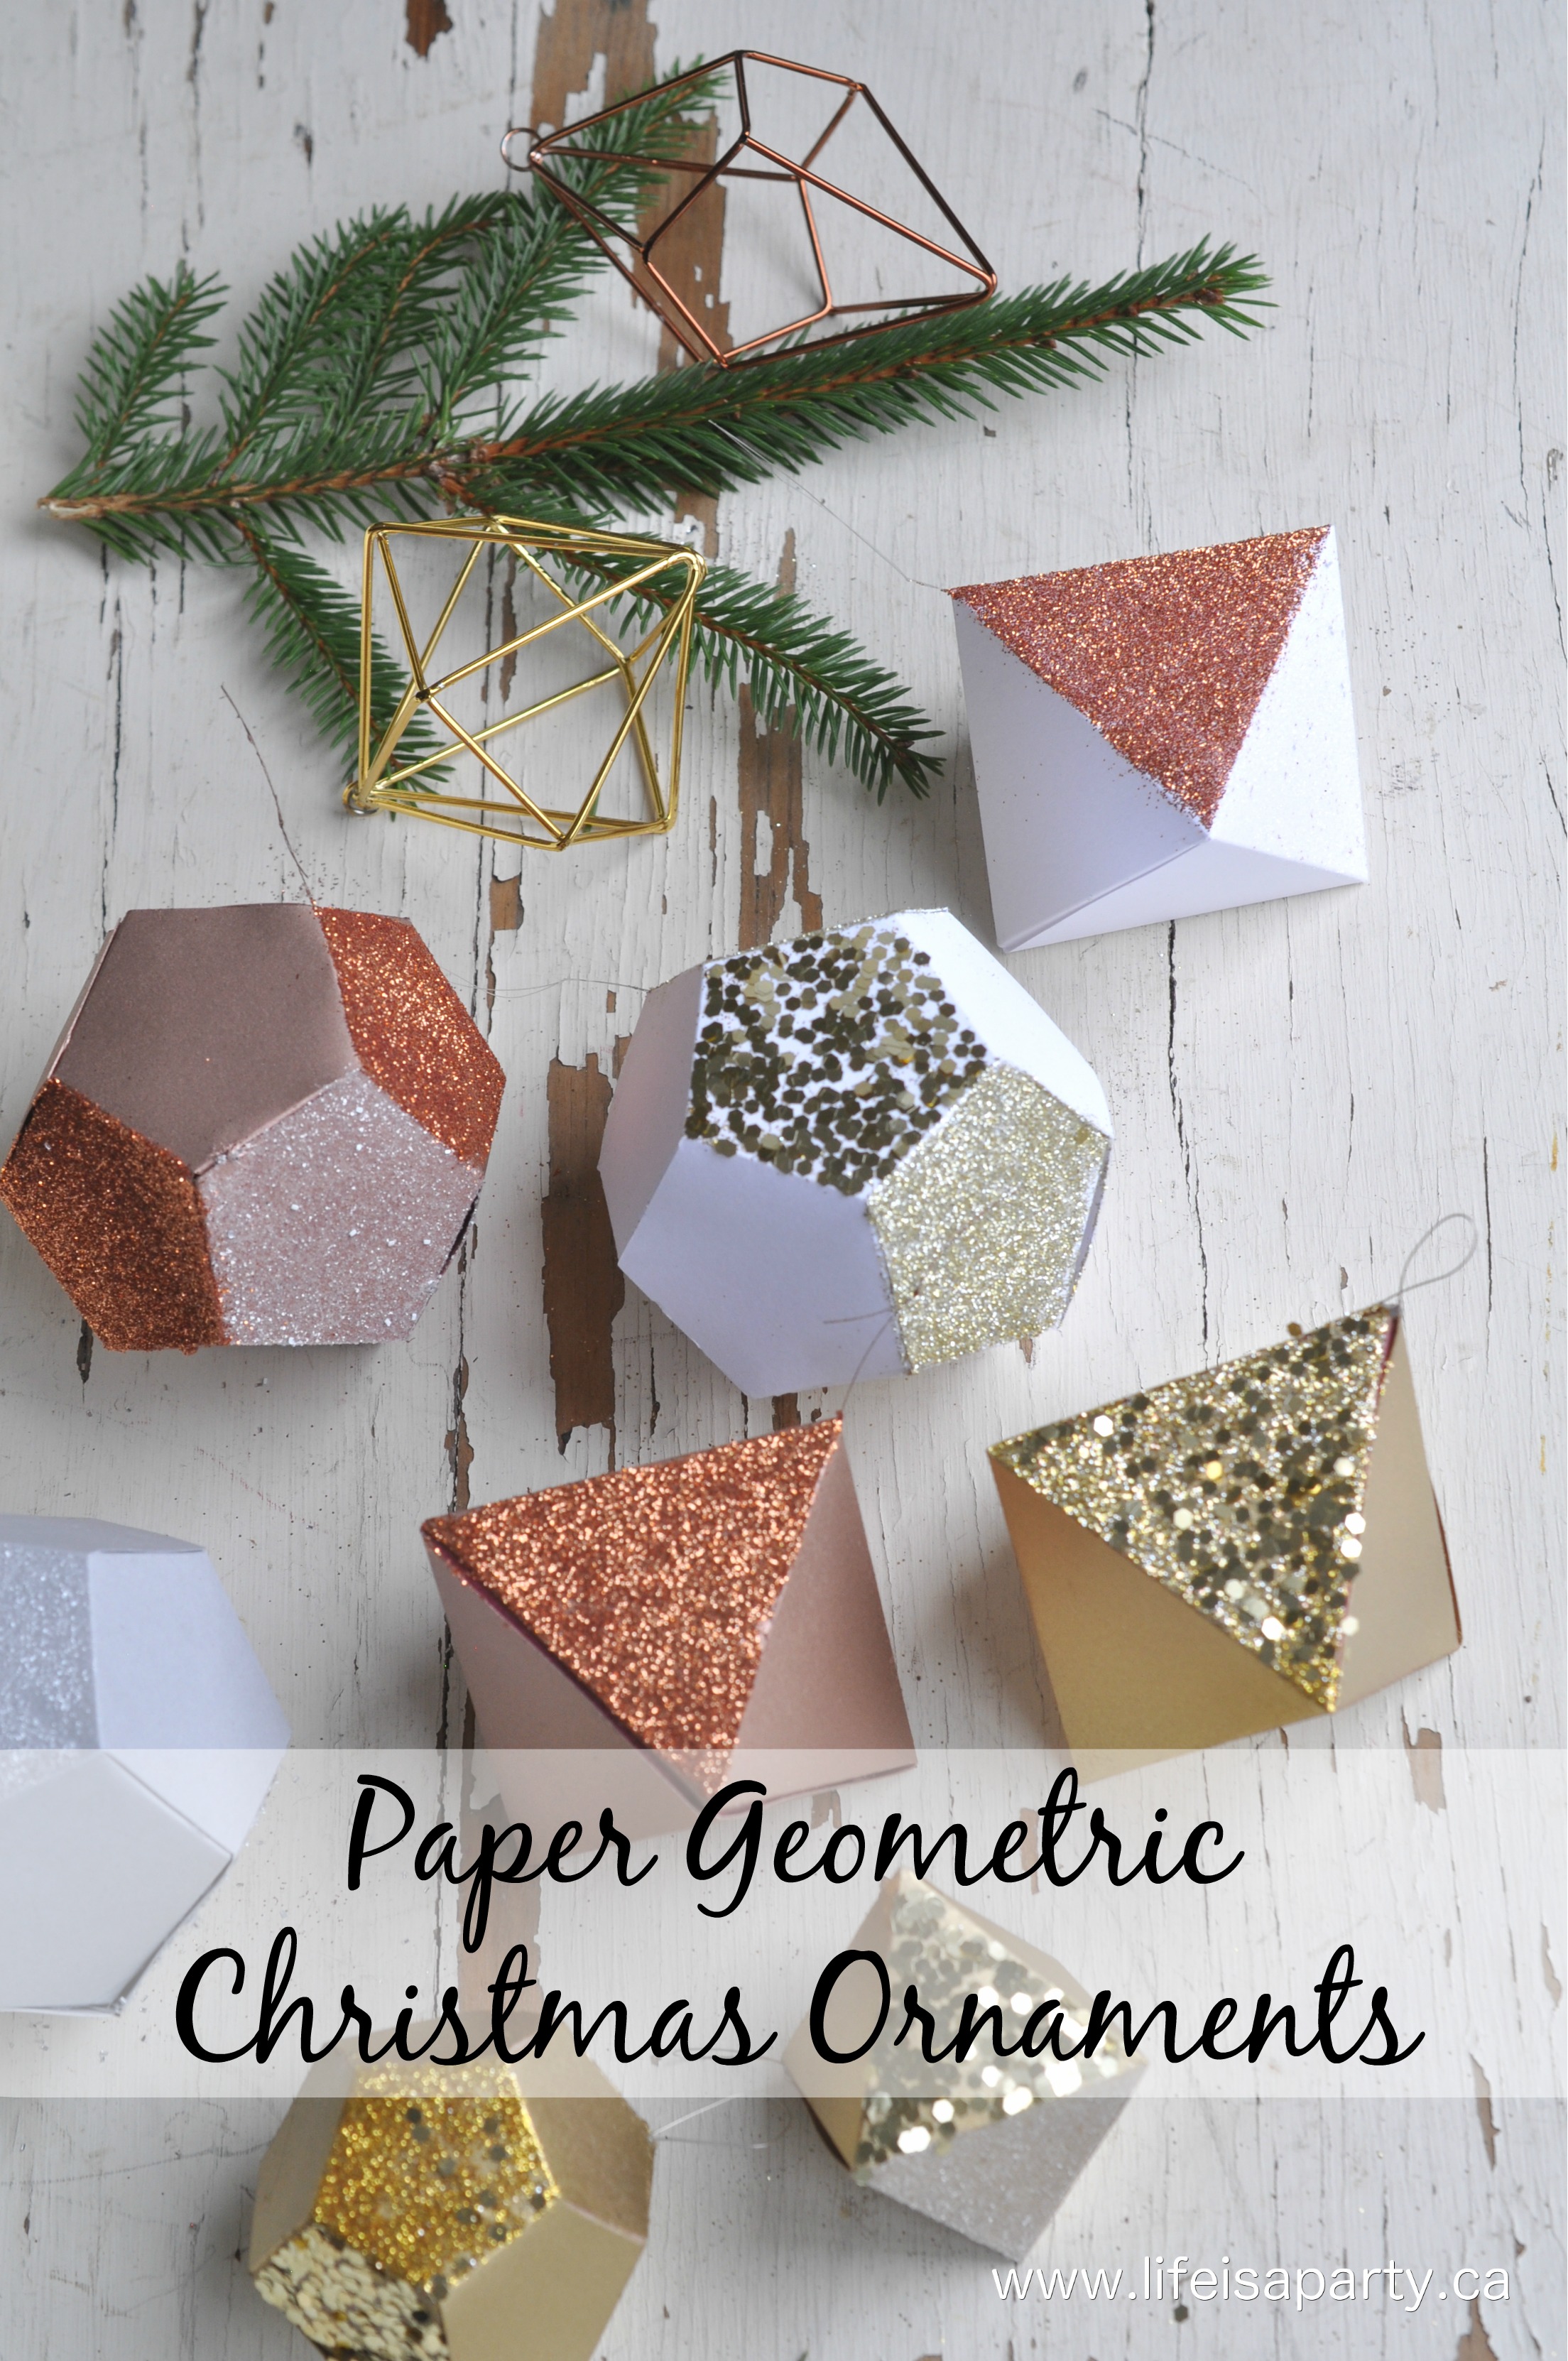 3D Paper Geometric Christmas Ornaments -Easy to make with a Cricut machine, and a free design. Spray paint and add glitter in any colours to match your Christmas decor.